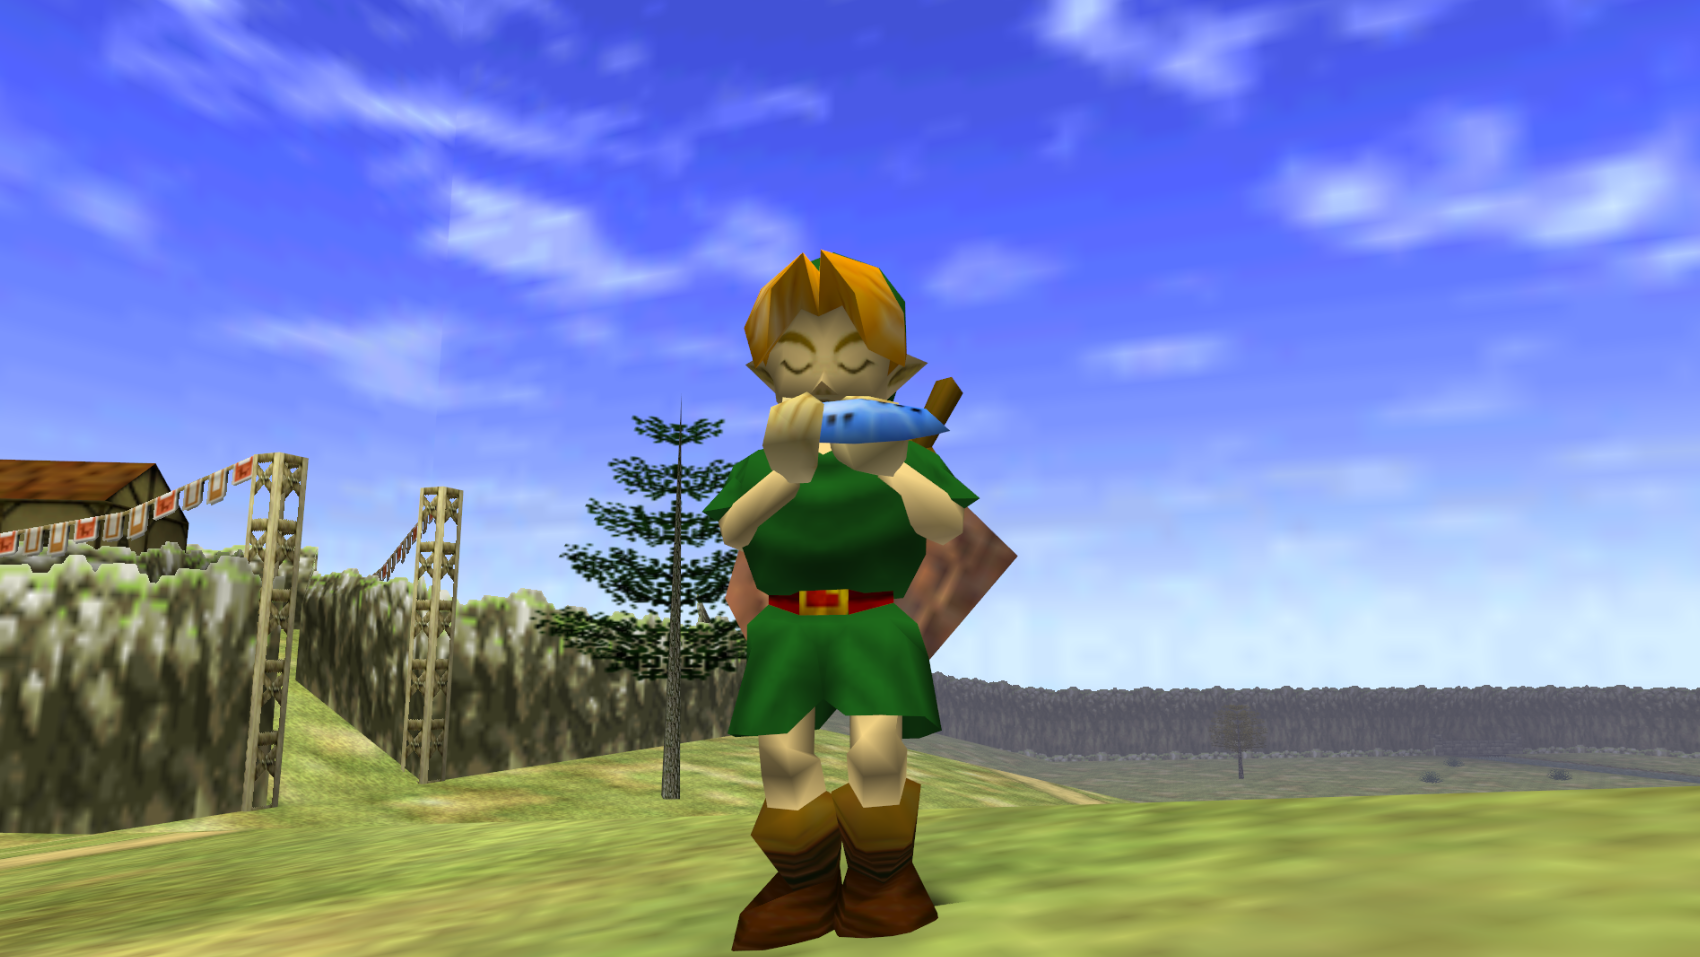 Ocarina of Time walkthrough - Lon Lon Ranch, Lost Woods and Sacred